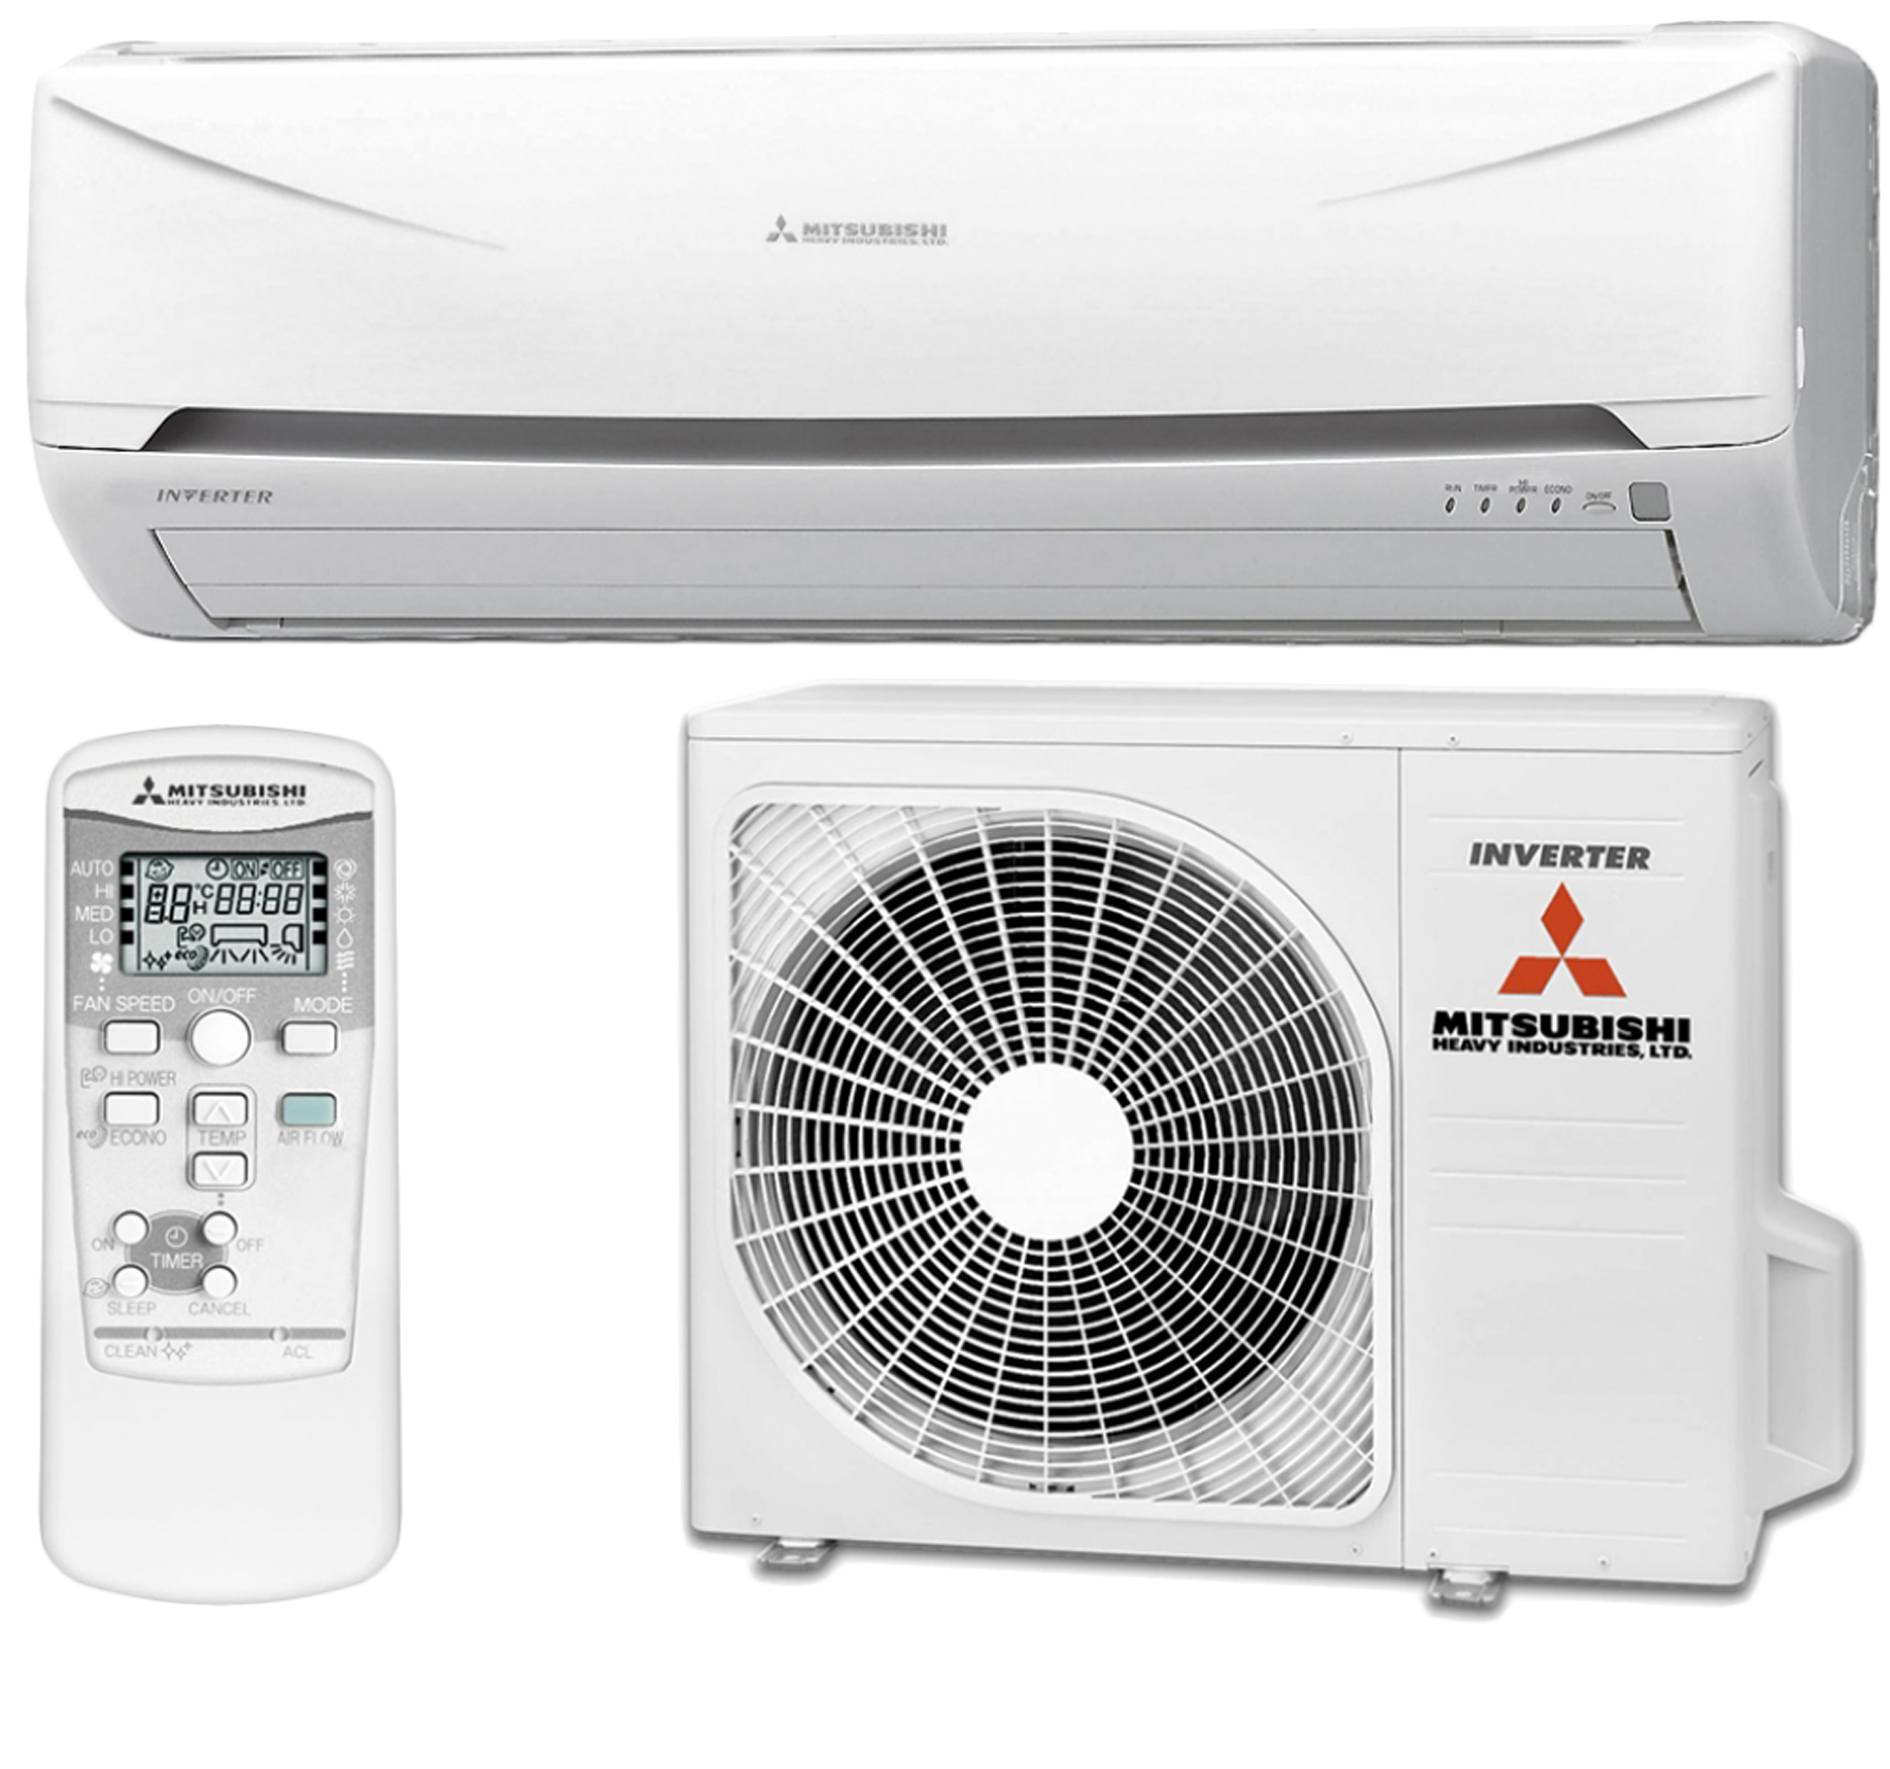 Air Conditioner Service & Repair by Rk.Service